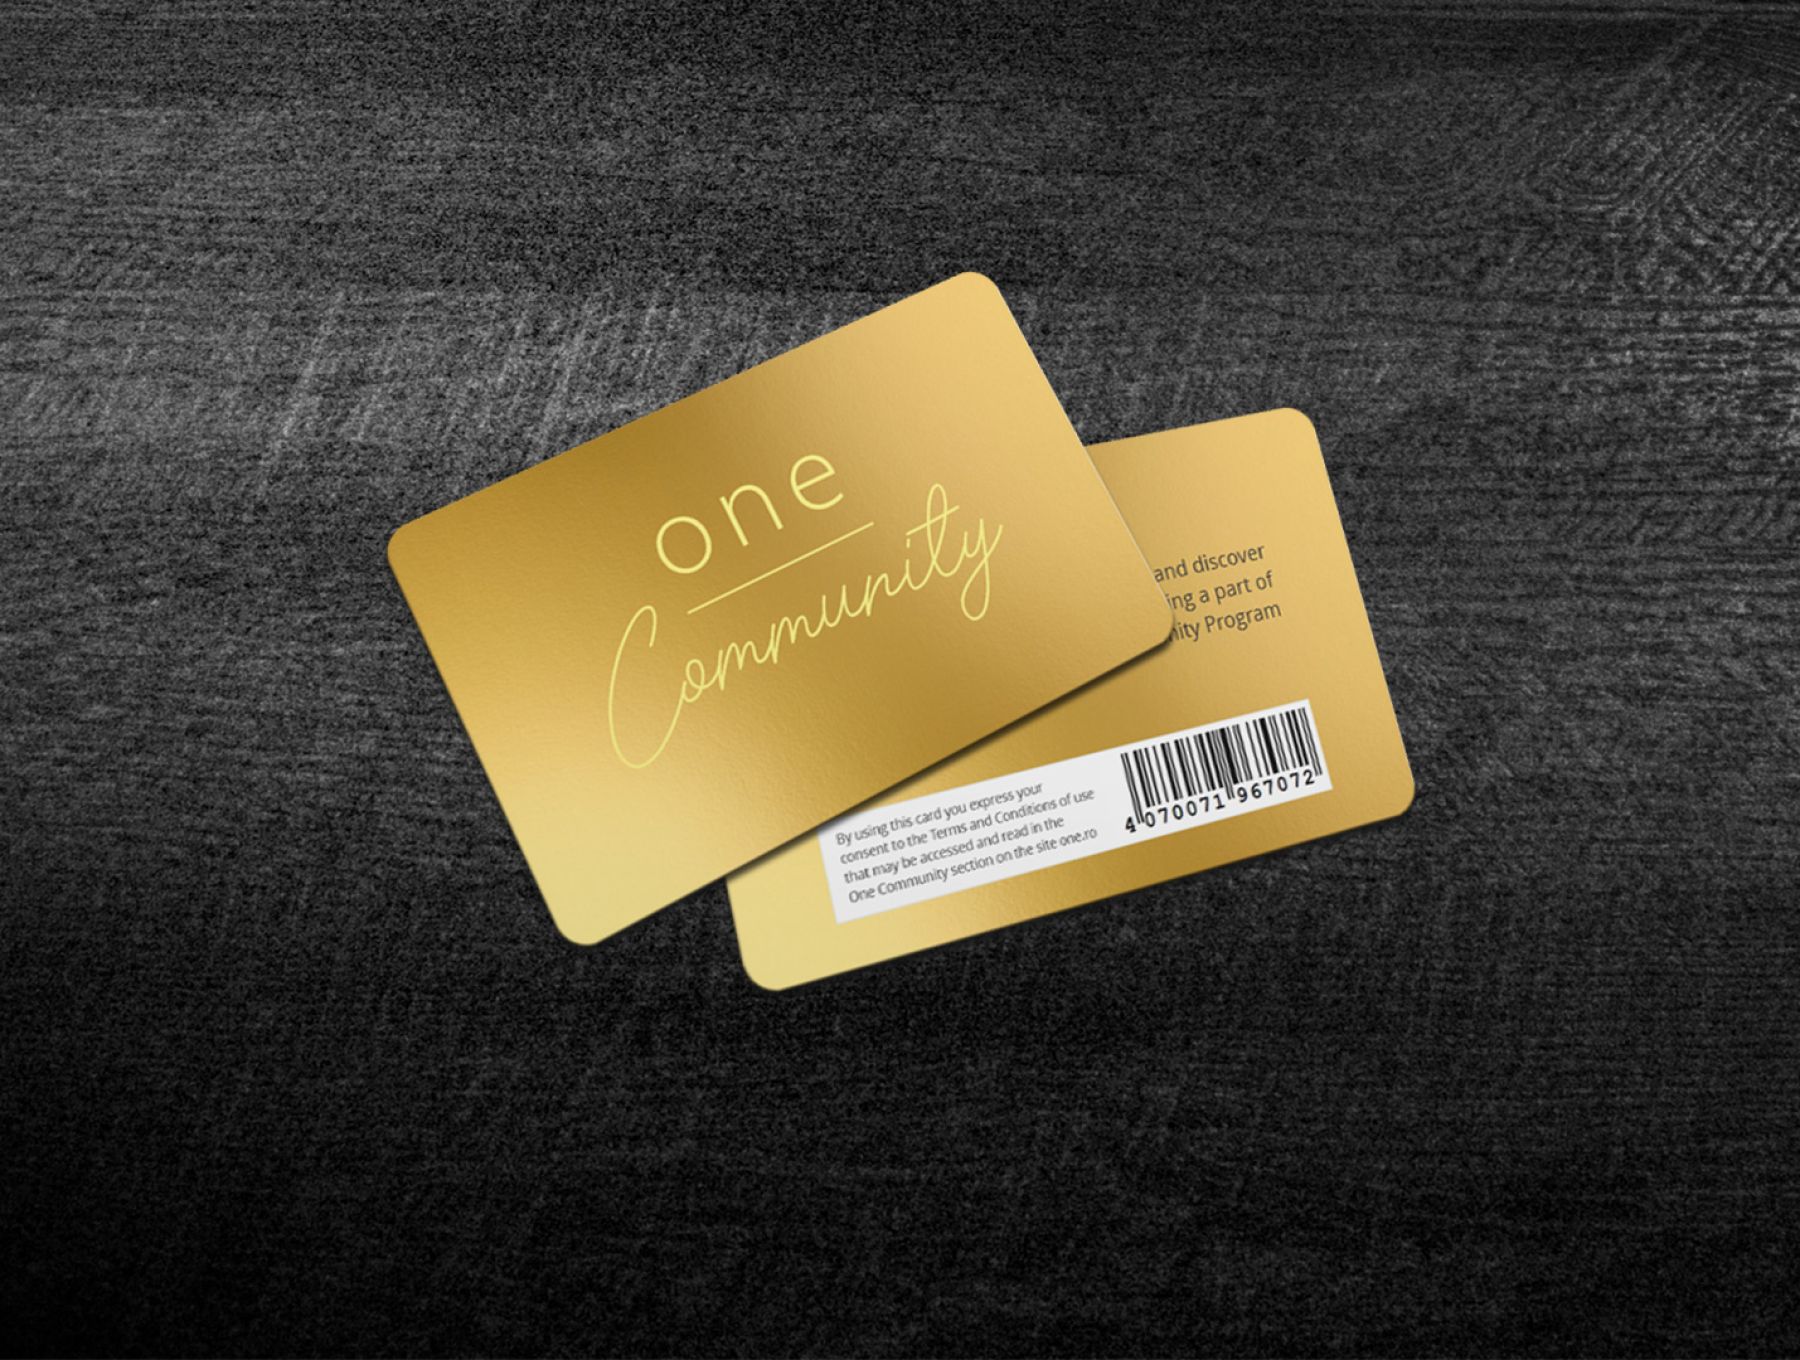 One Community Gold Card